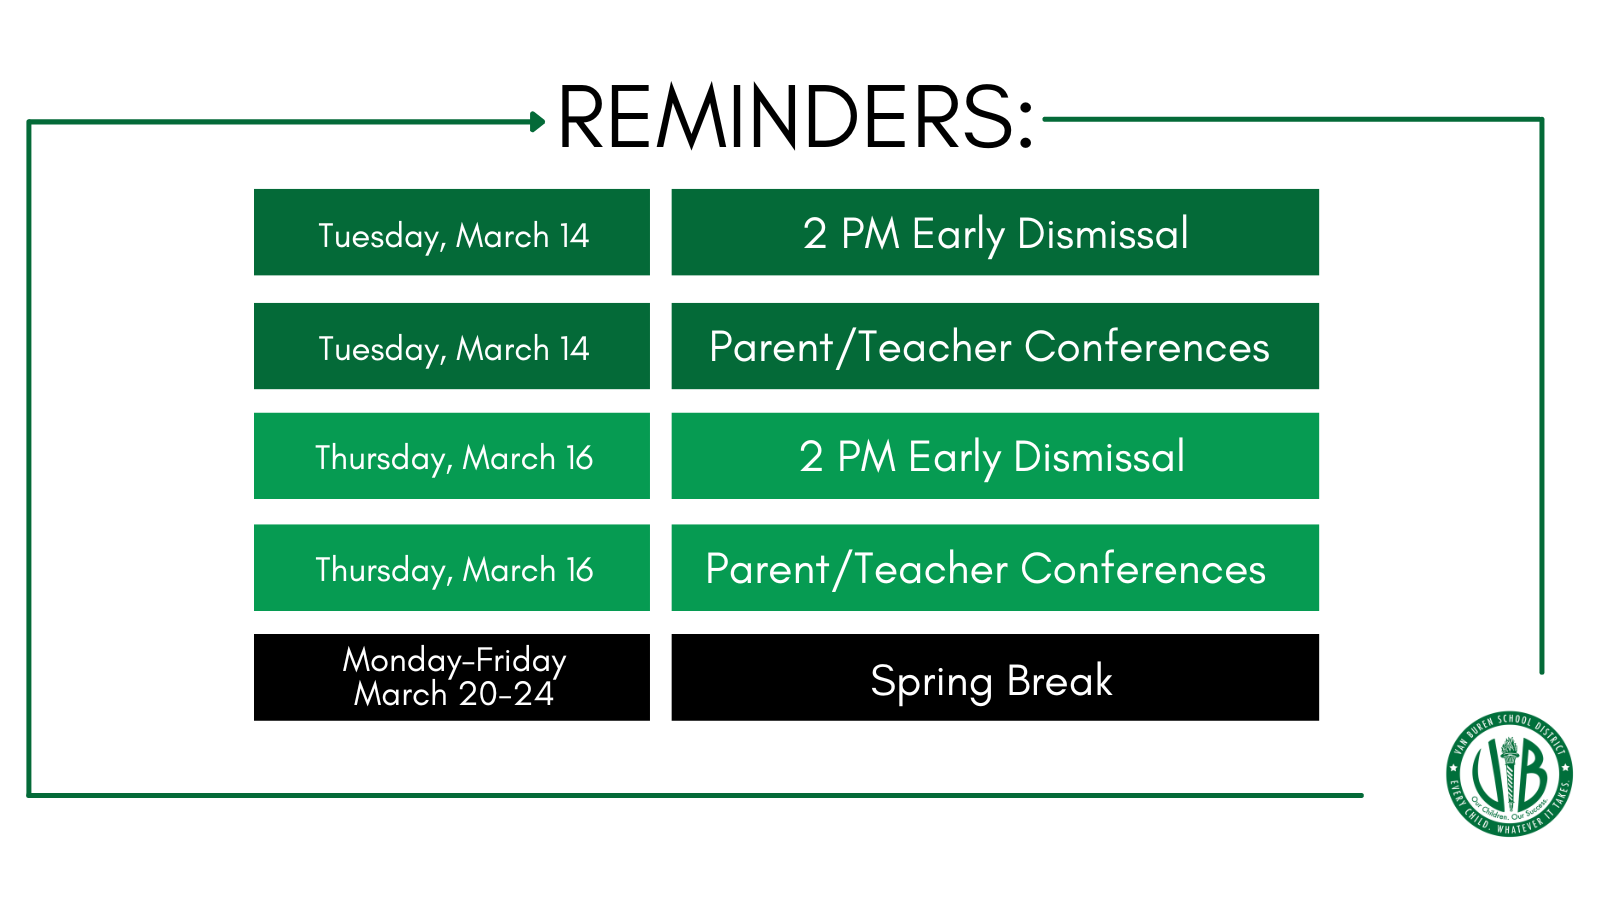 Parent/Teacher Conferences to be held March 14 and 16